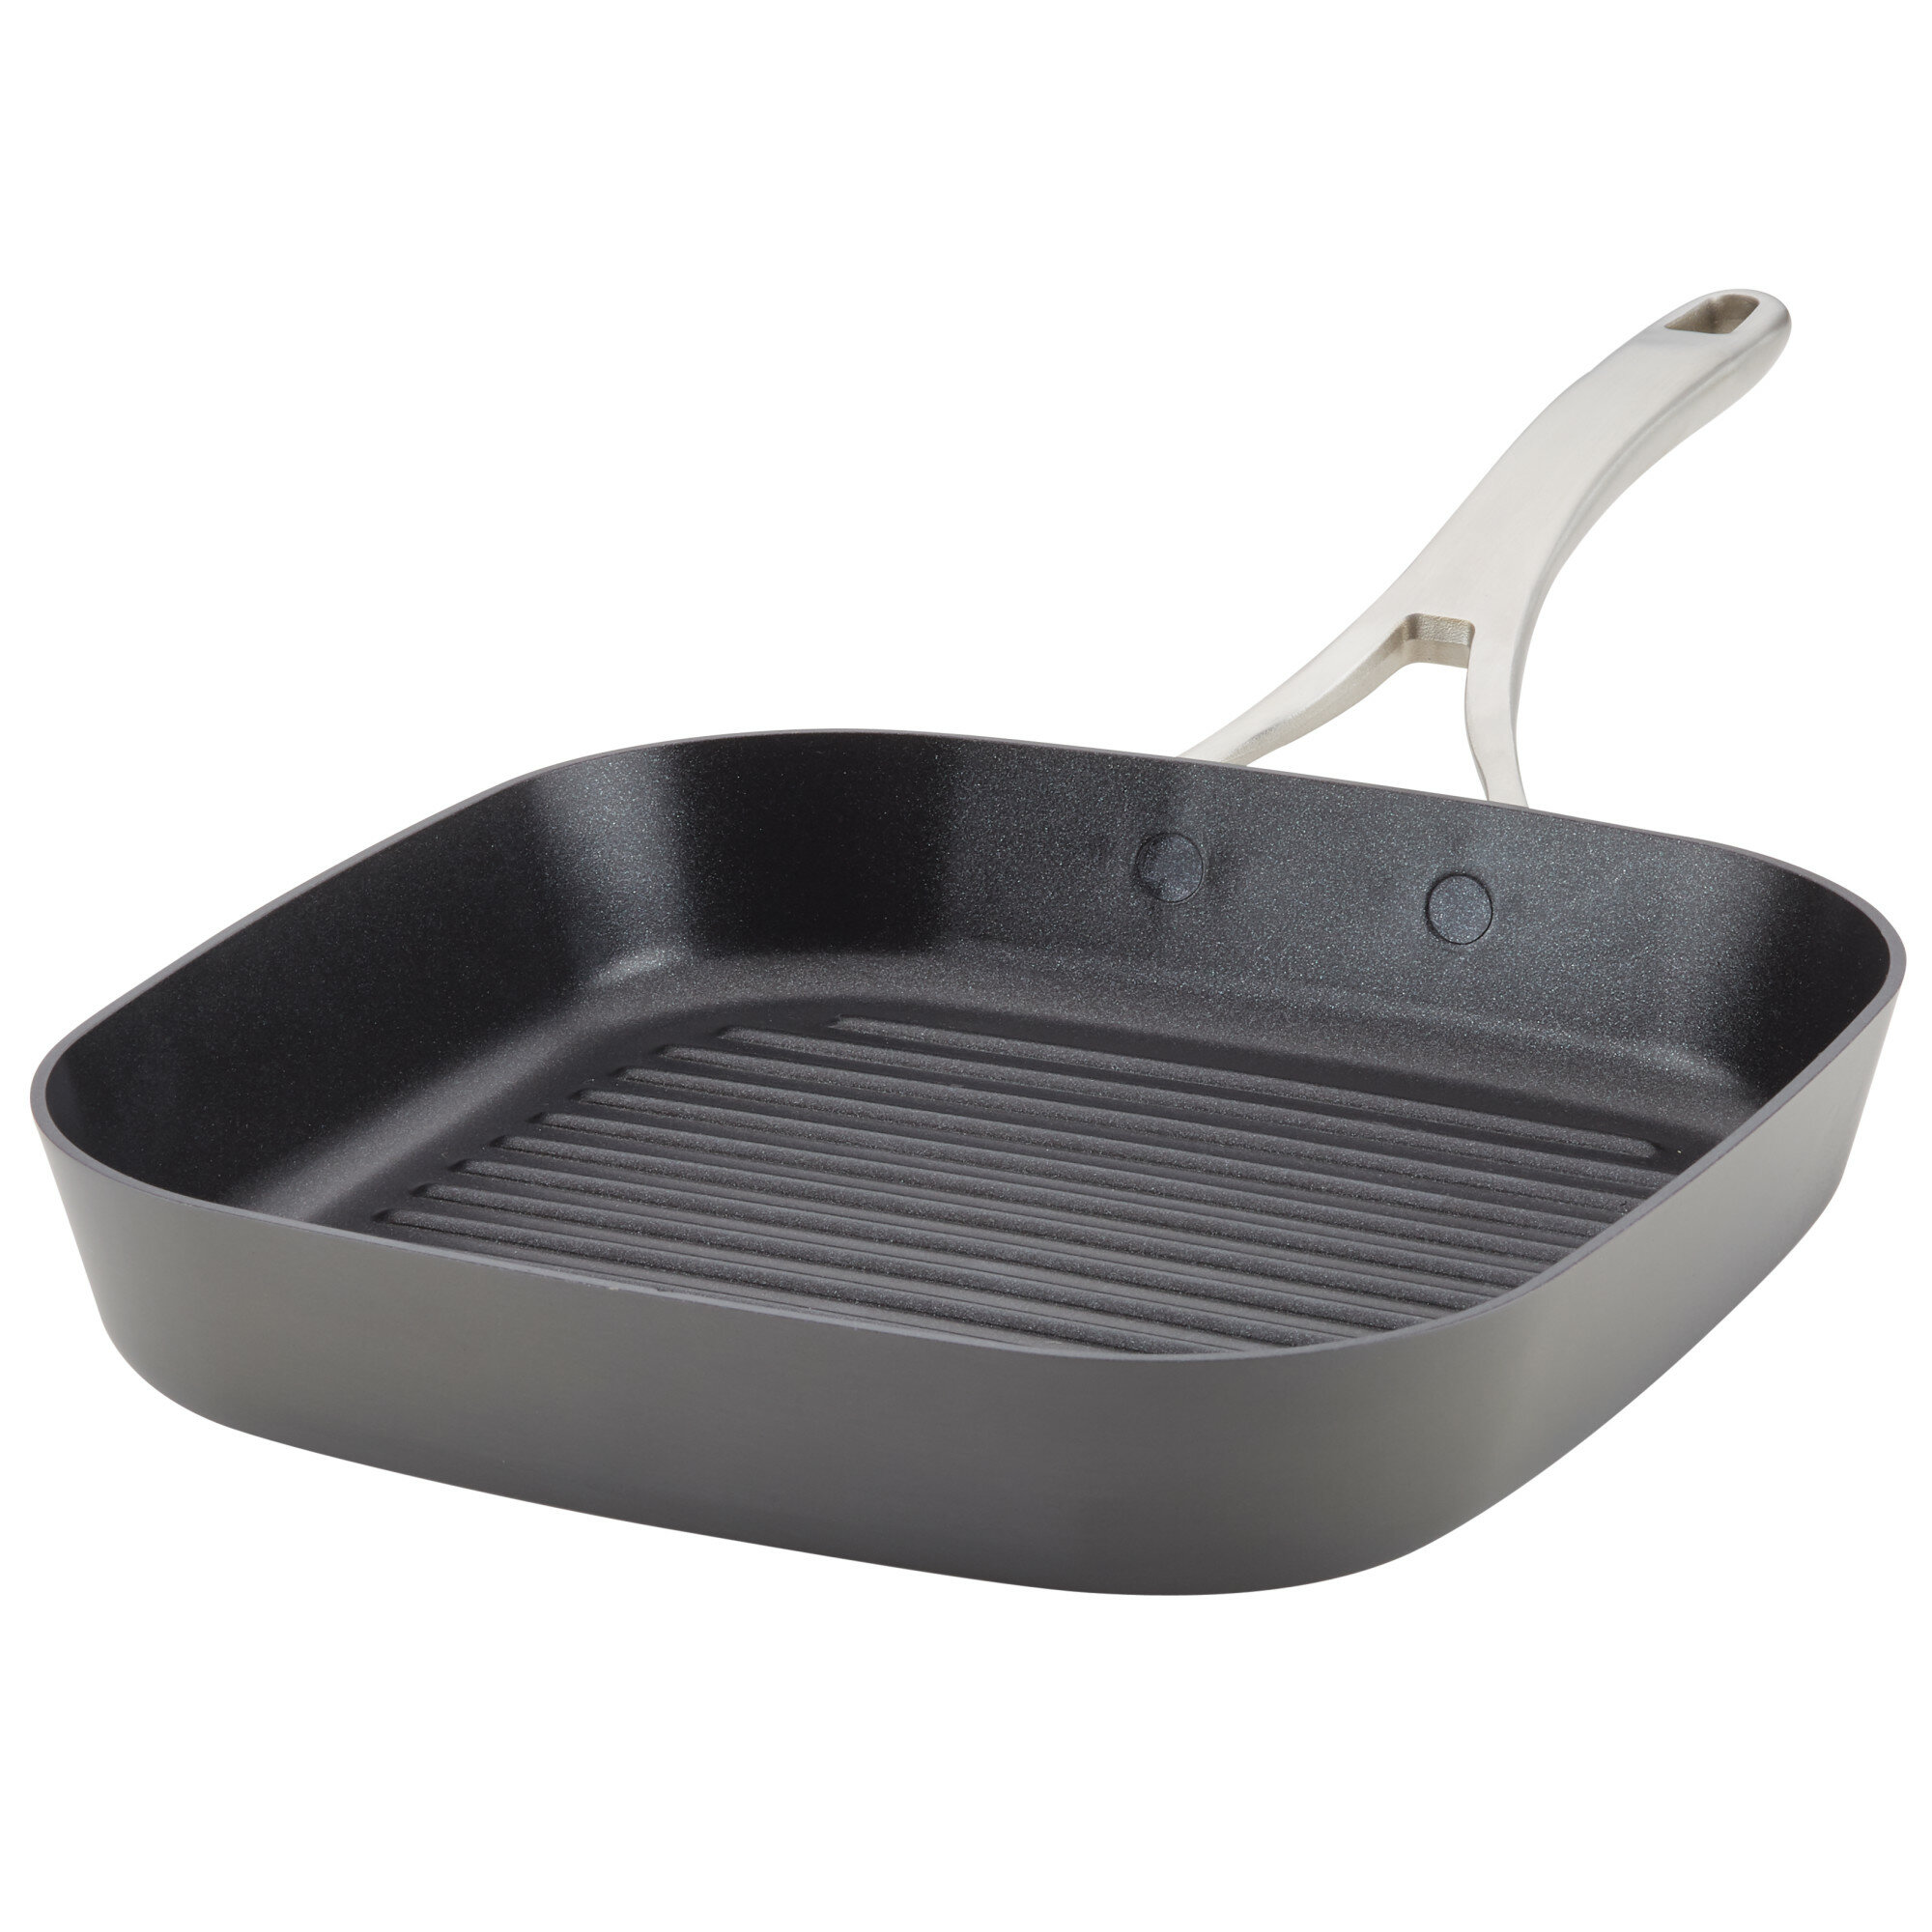 All-Clad HA1 Hard Anodized Nonstick Cookware, Square Griddle, 11 inch